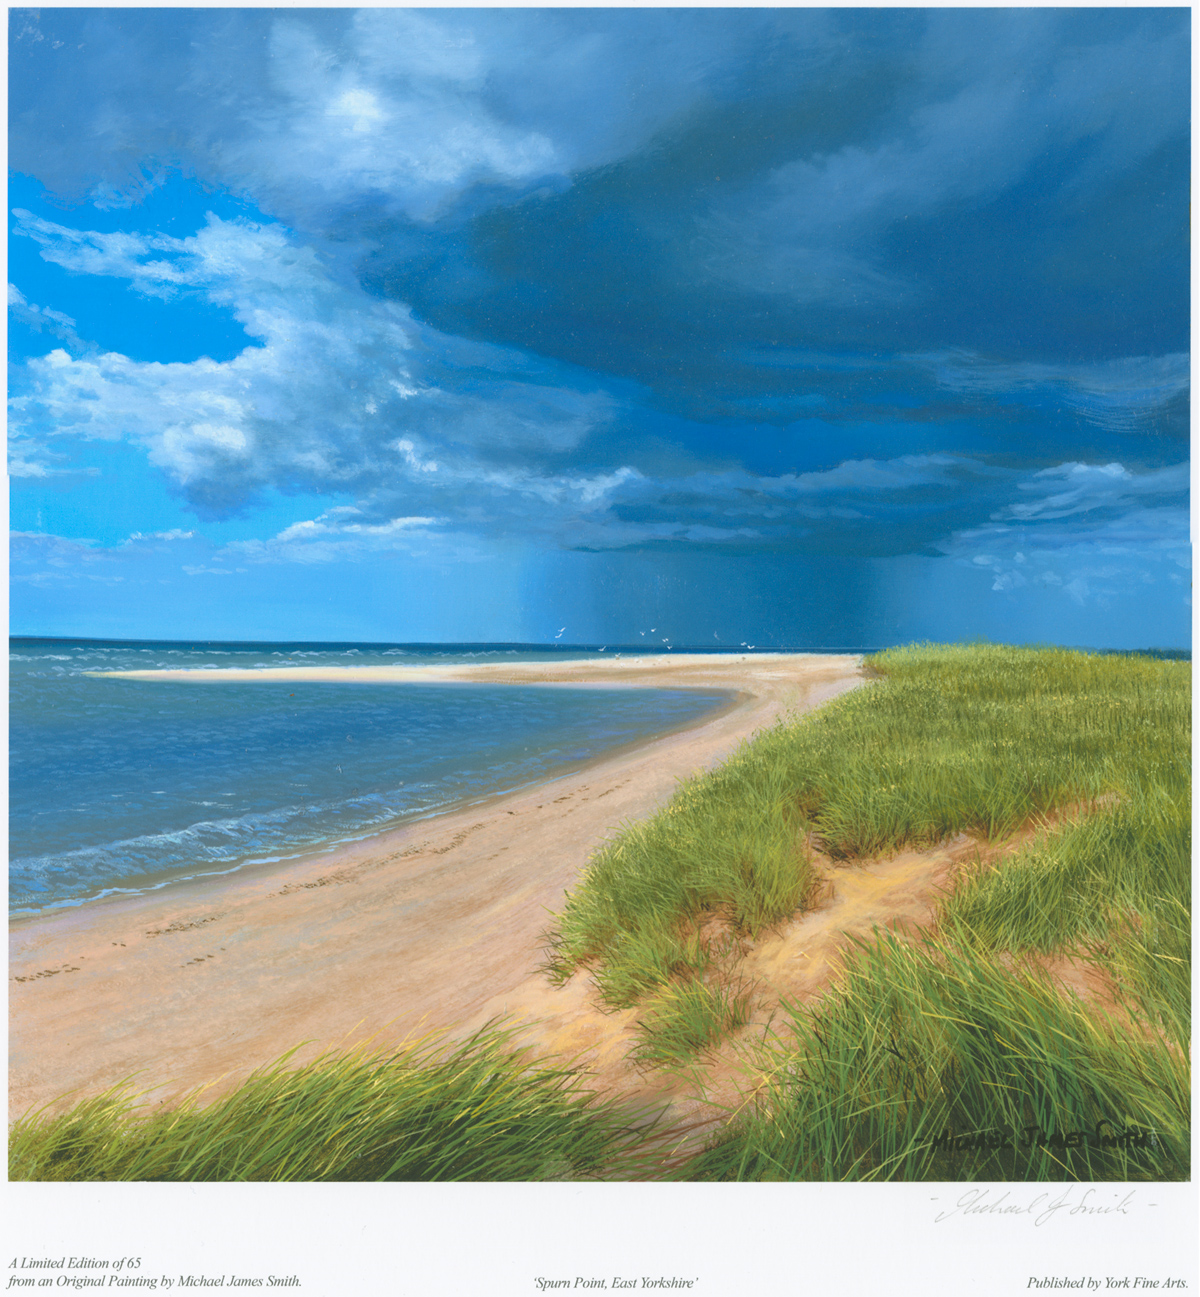 Michael James Smith, Signed limited edition print, Spurn Point, East Yorkshire, click to enlarge